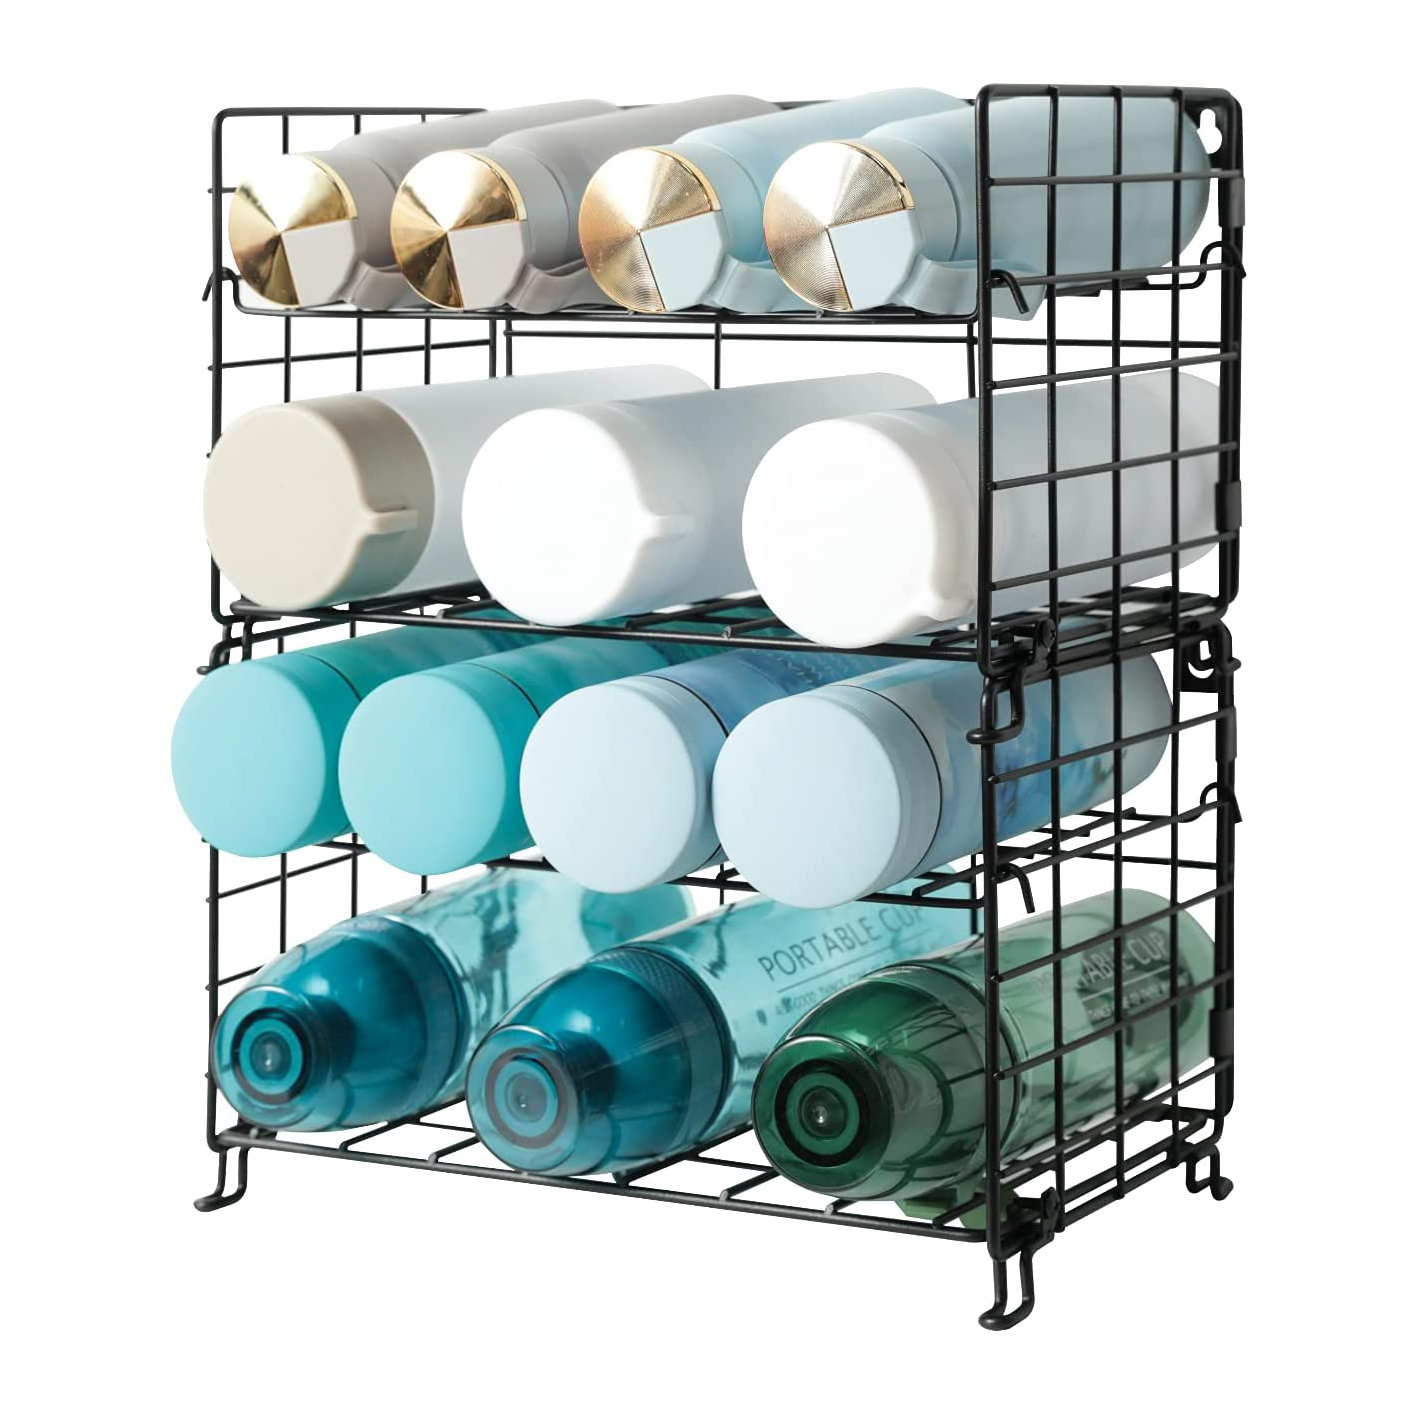 4-6-8-Tier Wall-Mounted or Countertops Stackable Storage Racks for Kitchen, Pantry, Cabinet, etc. Featured Image